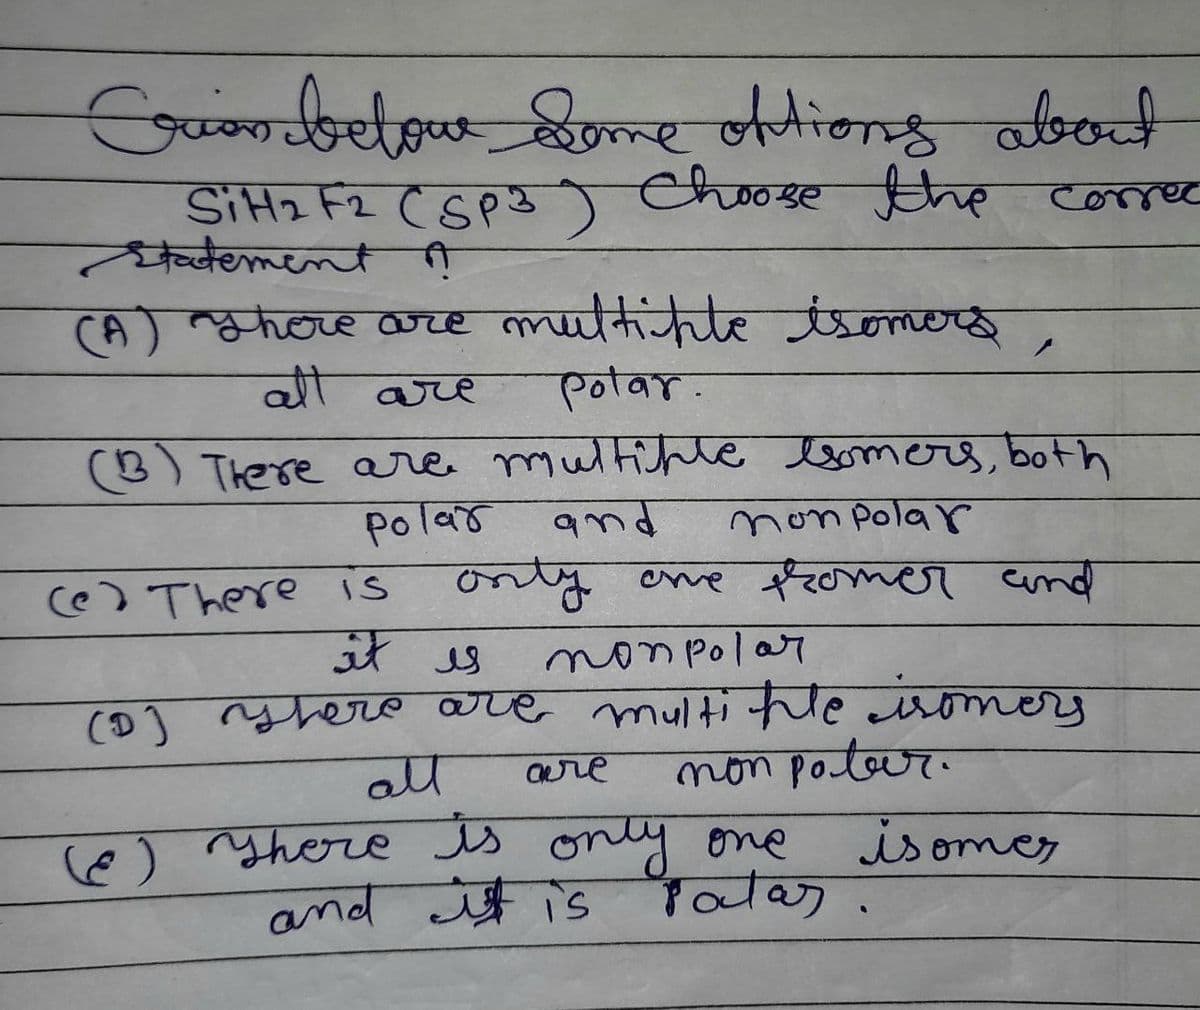 Crion below come oftions about
SiH2 F2 (SP3) Choose the correc
Statement A
(A) There are multiple isomers
all are Polar.
(B) There are multiple somers, both
and
polar
non polar
only one promer and
it is
non polar
(D) There are multiple isomers
non poter.
(e) There is
are
all
(Ⓒ) There is only one
and it is
isomes
Patas.